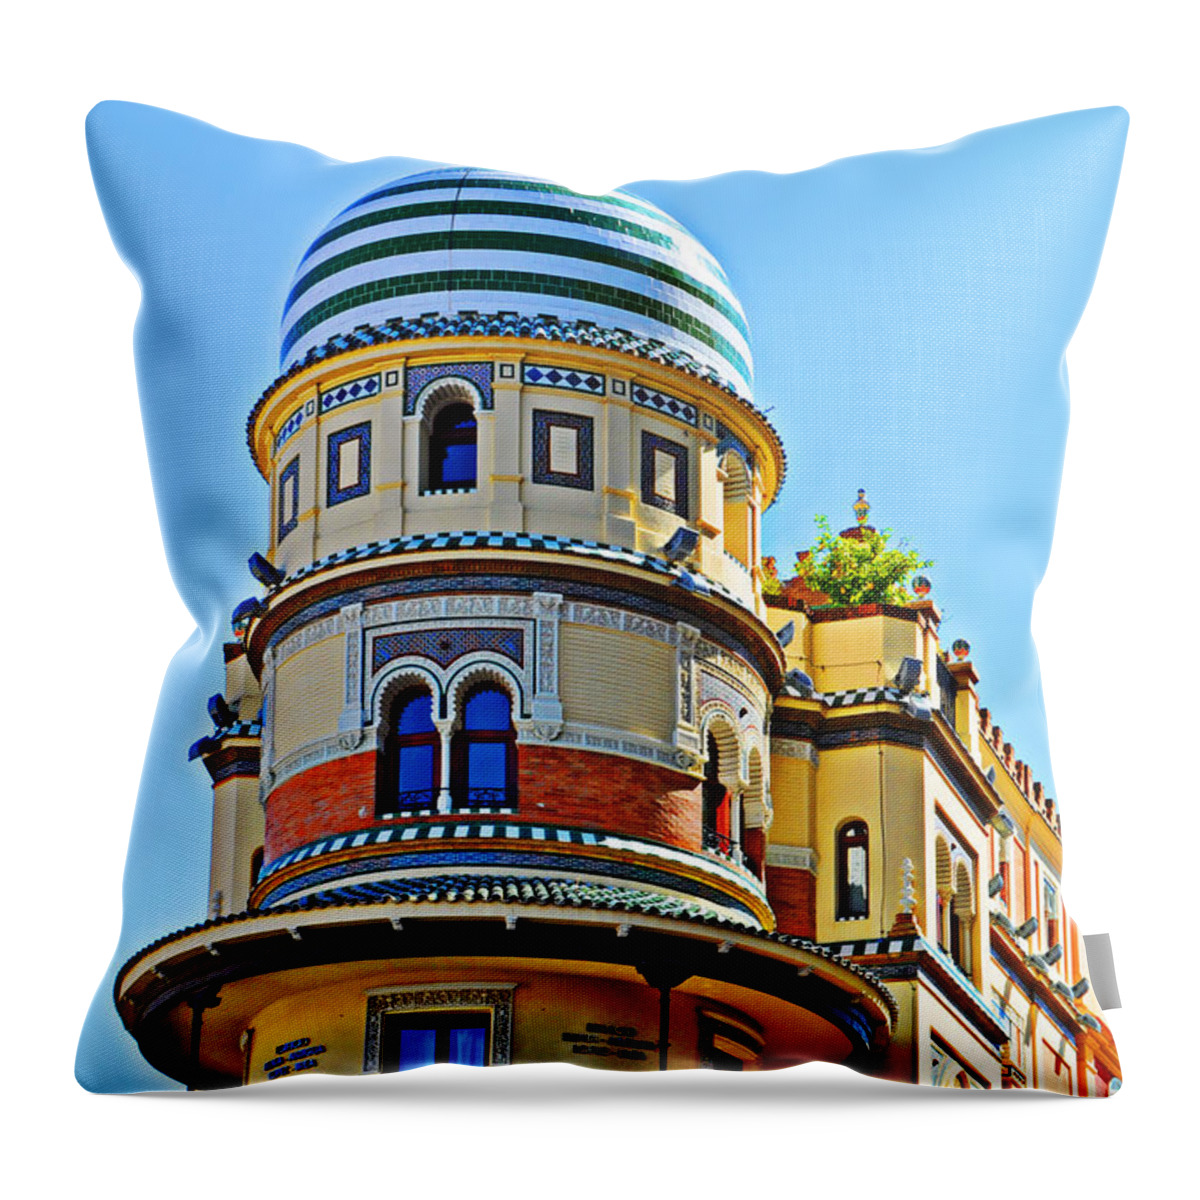 Moorish Tower With Hdr Processing Throw Pillow featuring the photograph Moorish Tower with HDR processing by Mary Machare